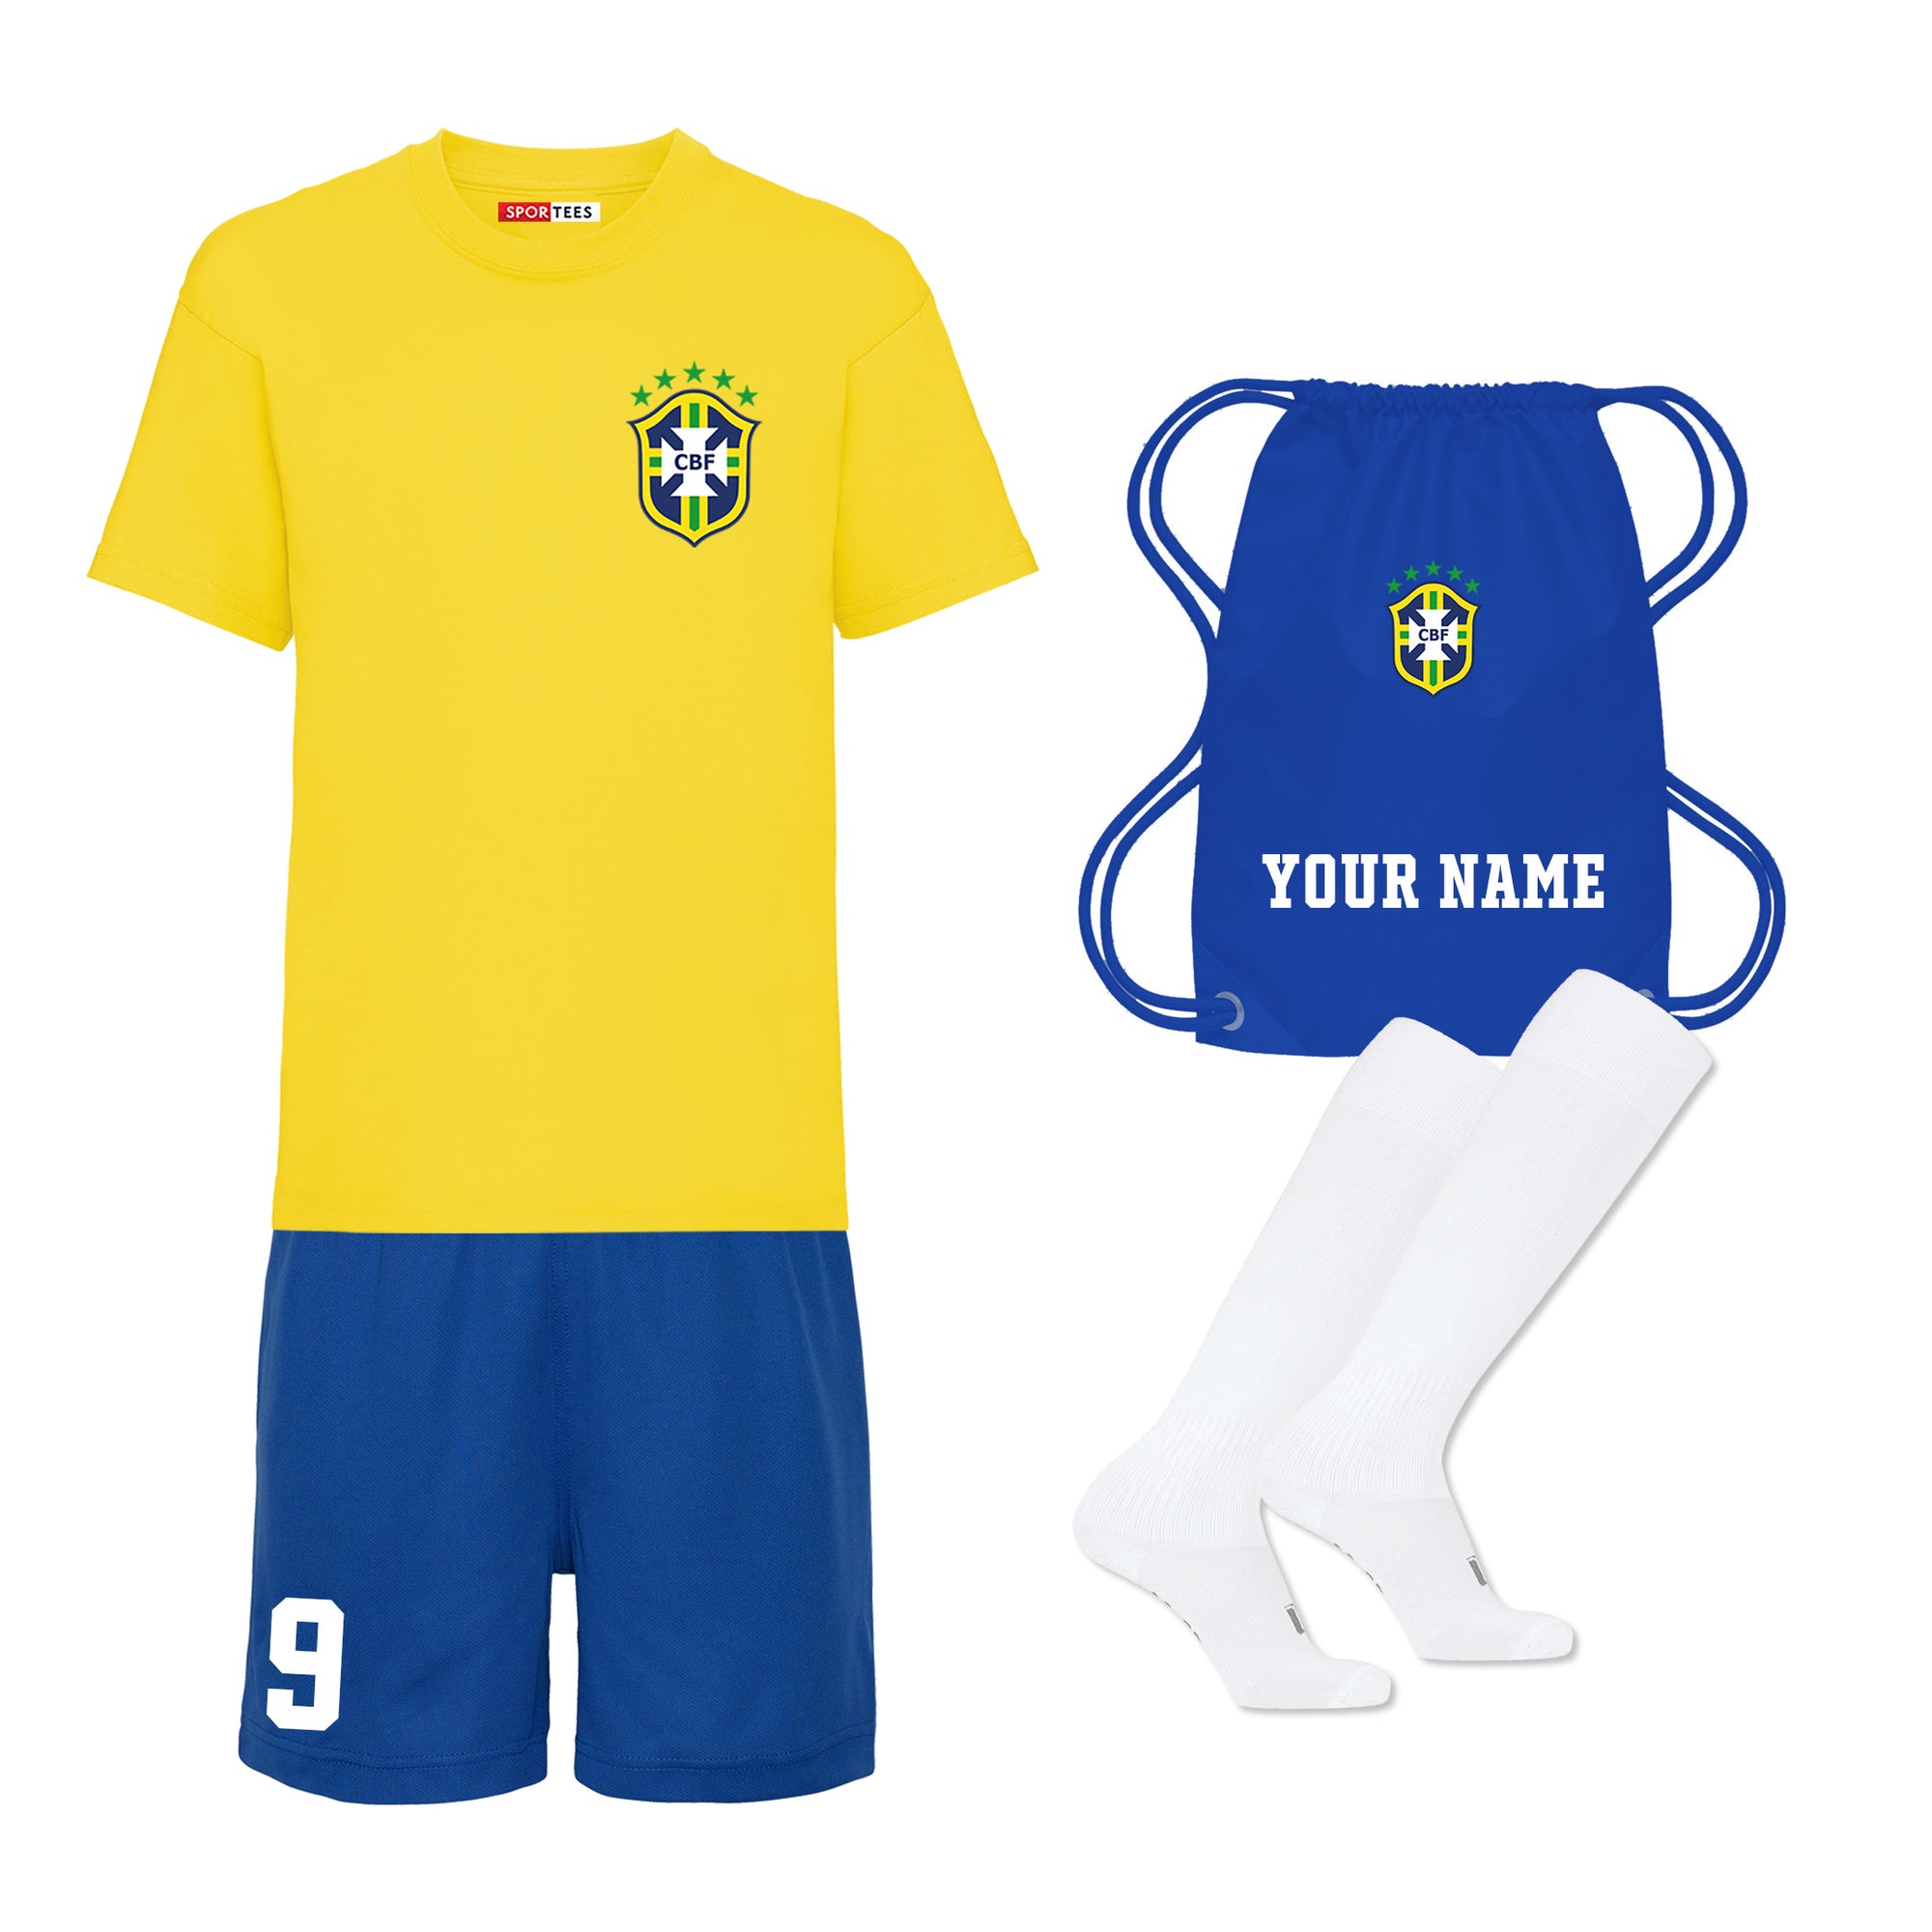 Personalised Brazil Style Yellow & Blue Bundle With Socks & Bag